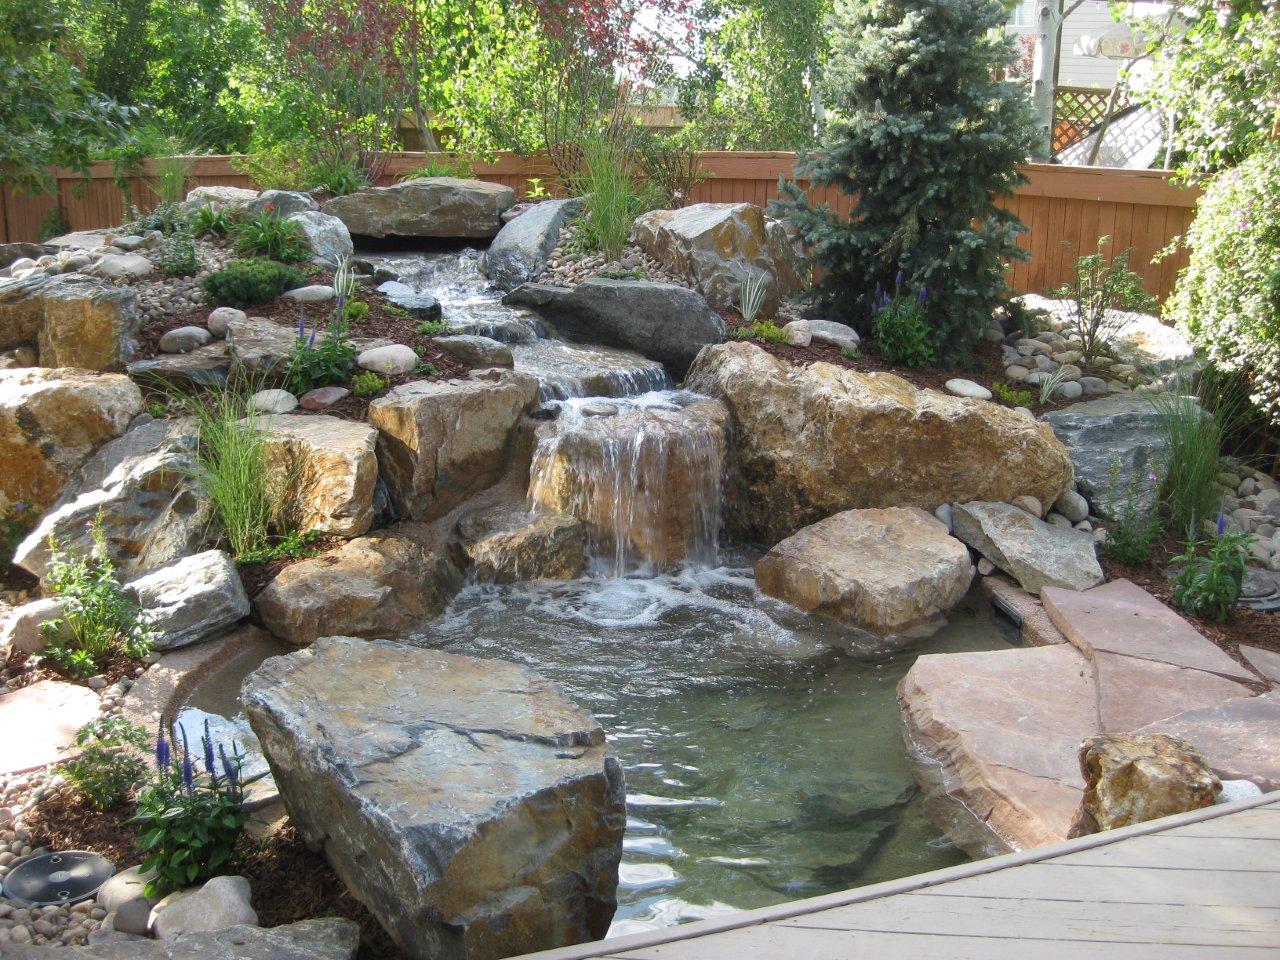 Why use landscaping stones?